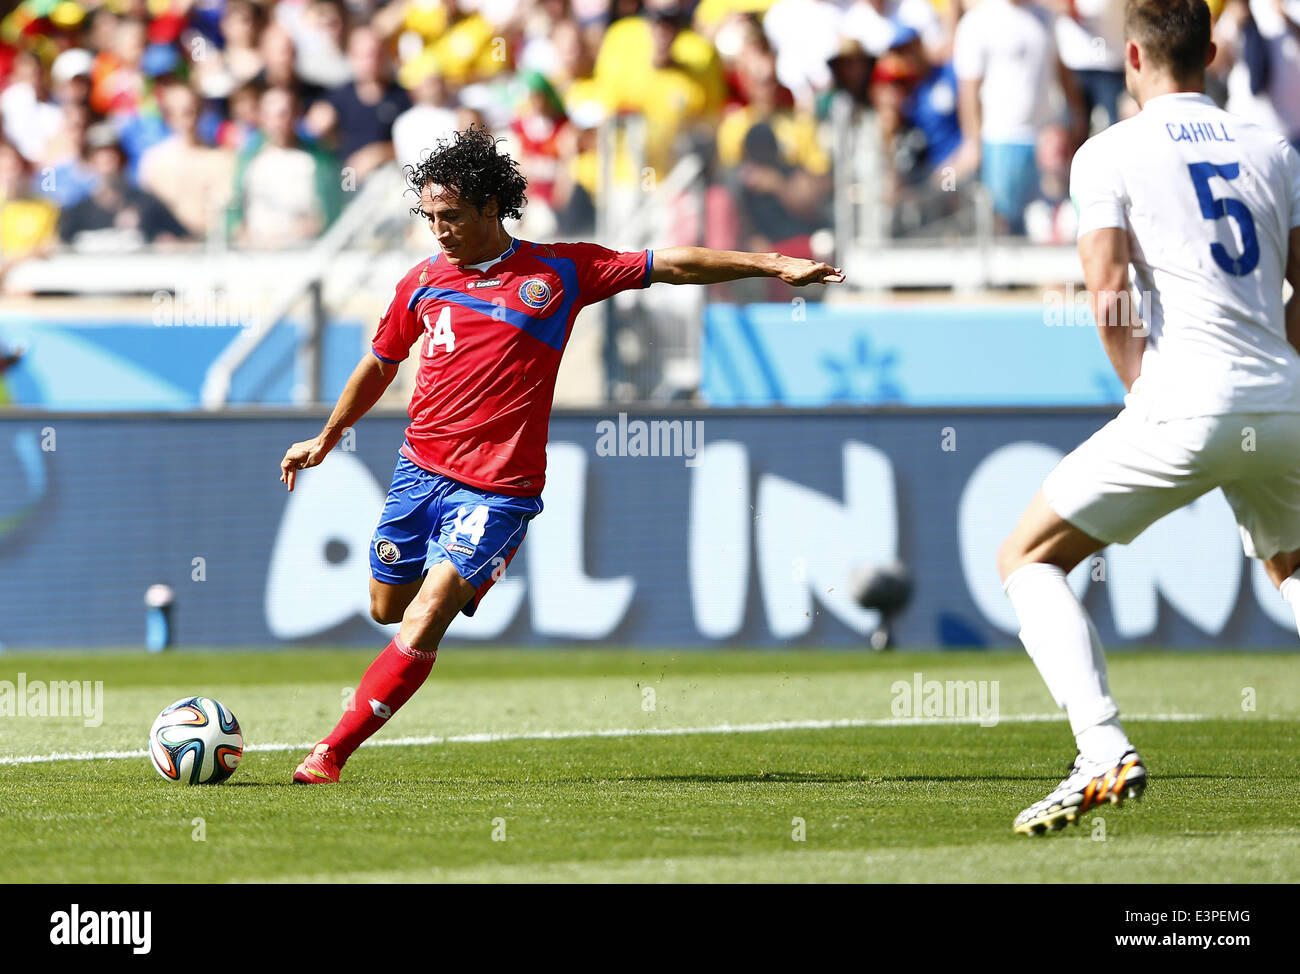 Belo Horizonte, Brazil. 24th June, 2014. Costa Rica's Randall Brenes (L) passes the ball during a Group D match between Costa Rica and England of 2014 FIFA World Cup at the Estadio Mineirao Stadium in Belo Horizonte, Brazil, on June 24, 2014. © Liu Bin/Xinhua/Alamy Live News Stock Photo